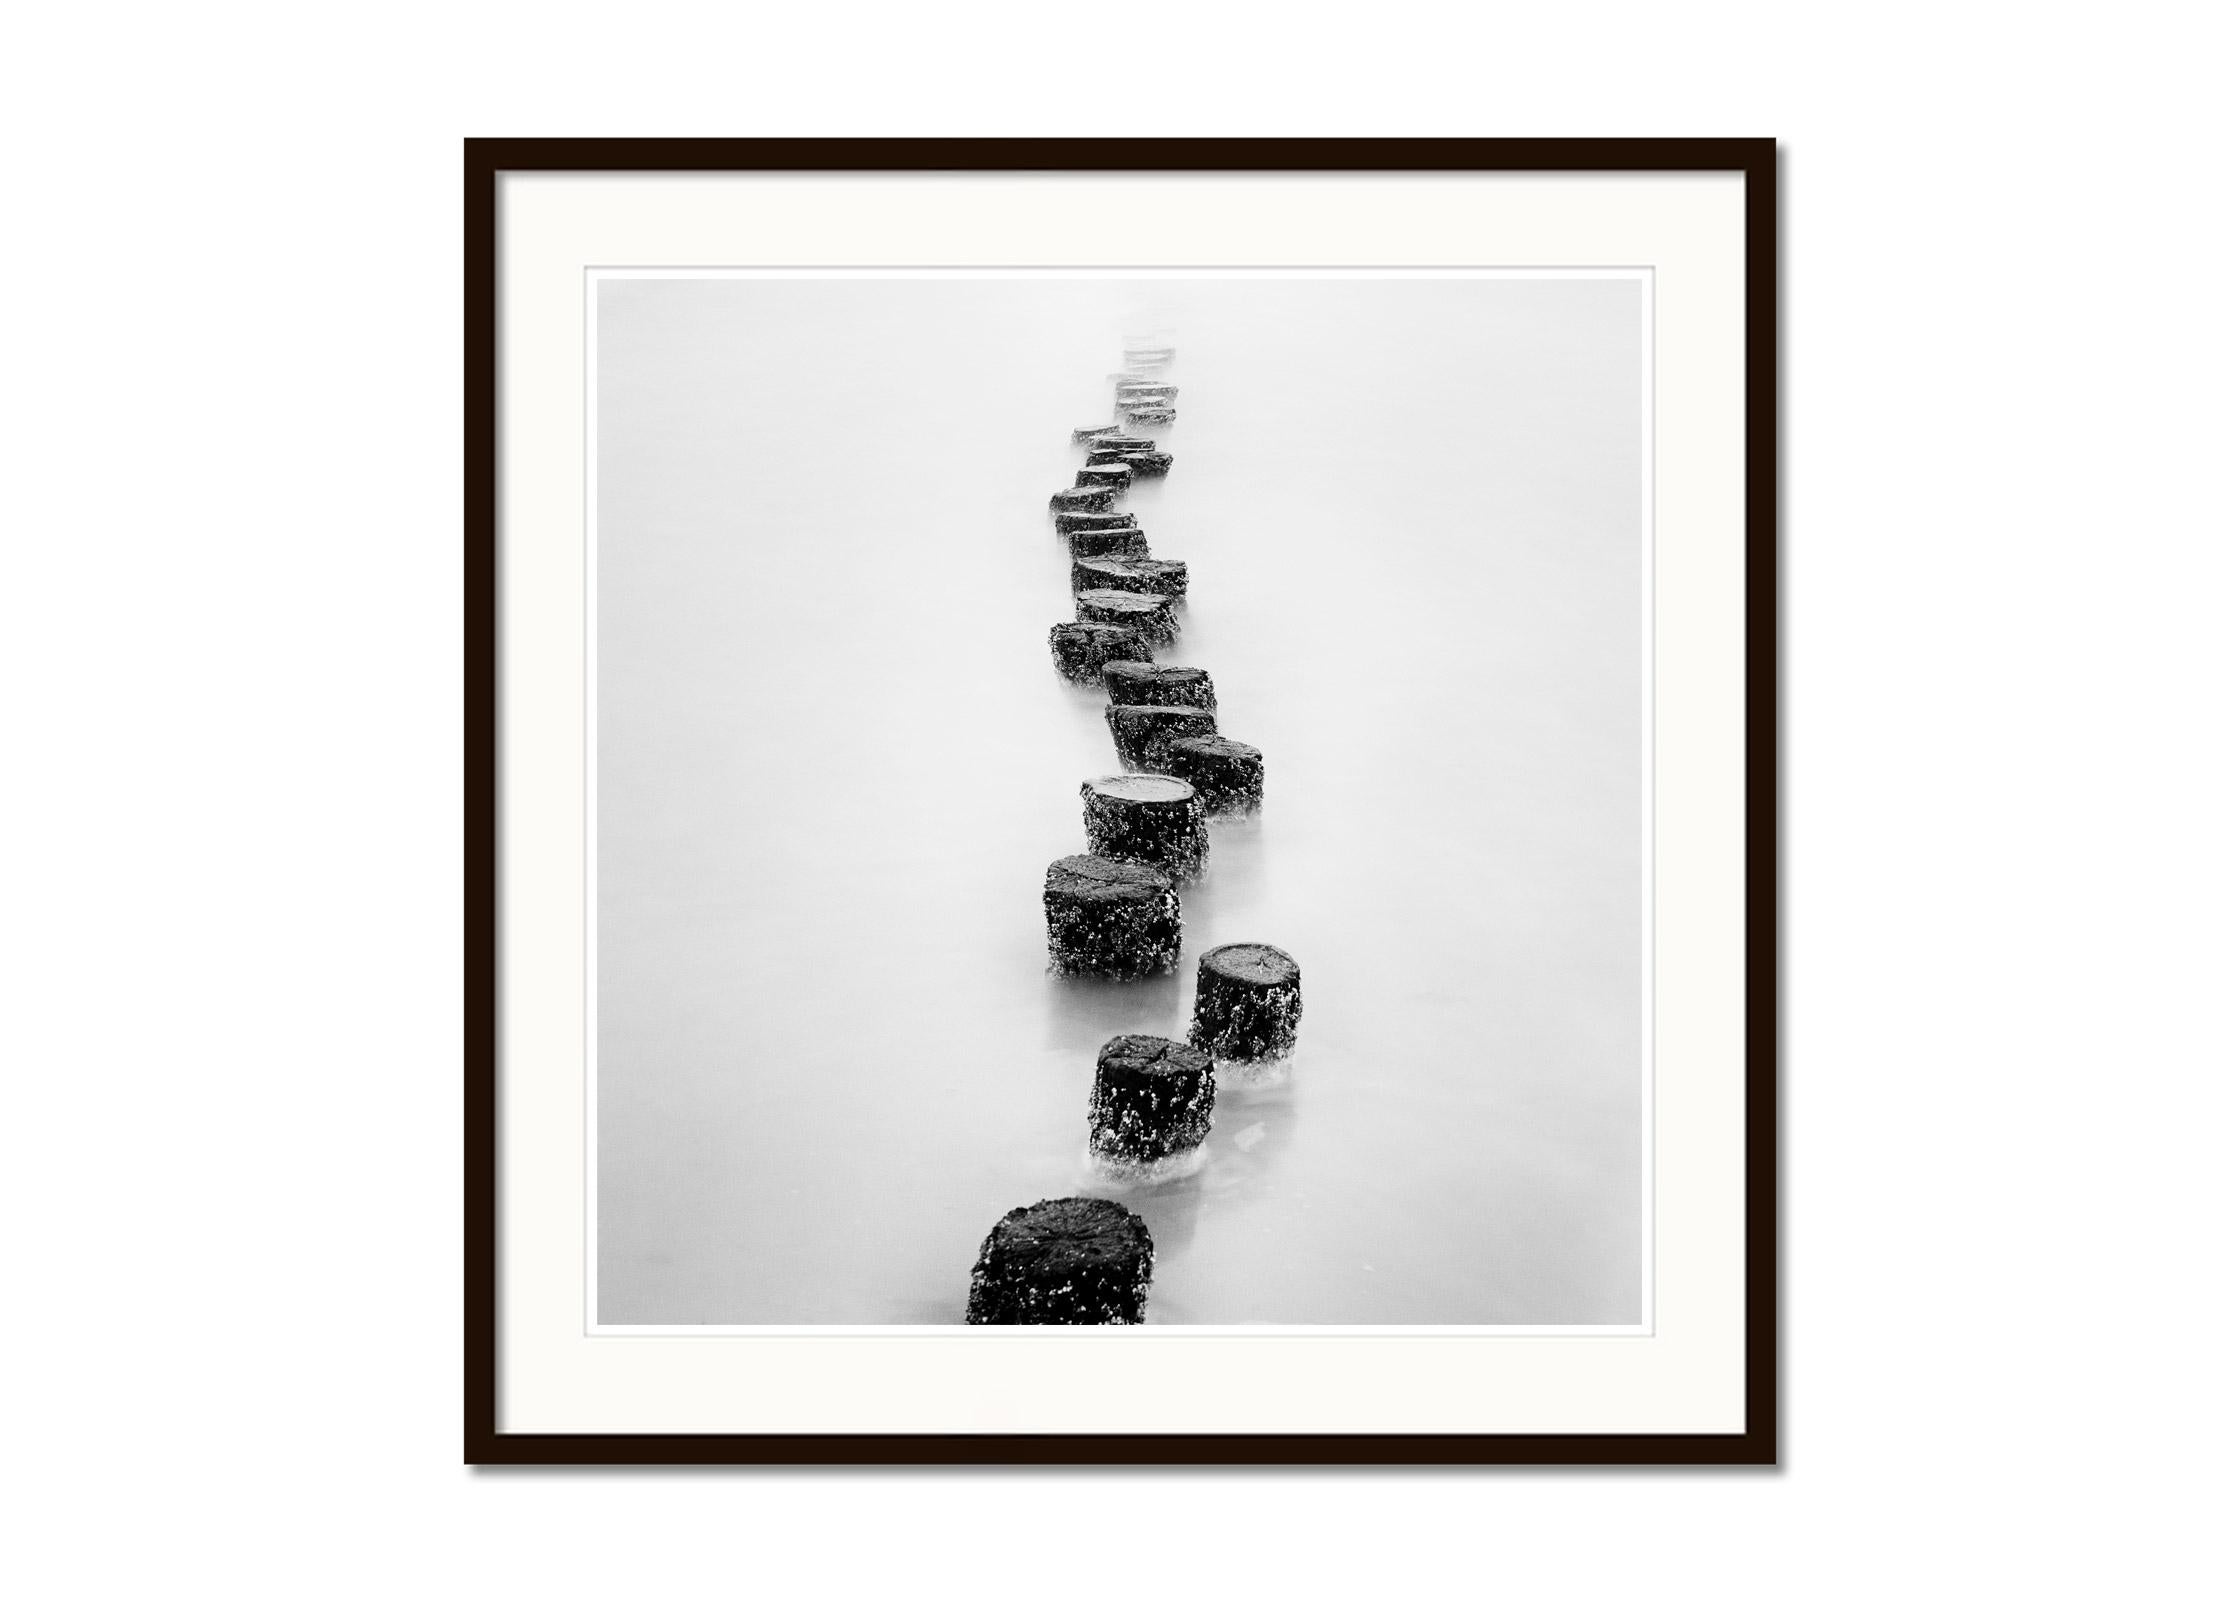 Wooden Pegs, long exposure, black and white, fine art, waterscape, photography - Gray Landscape Photograph by Gerald Berghammer